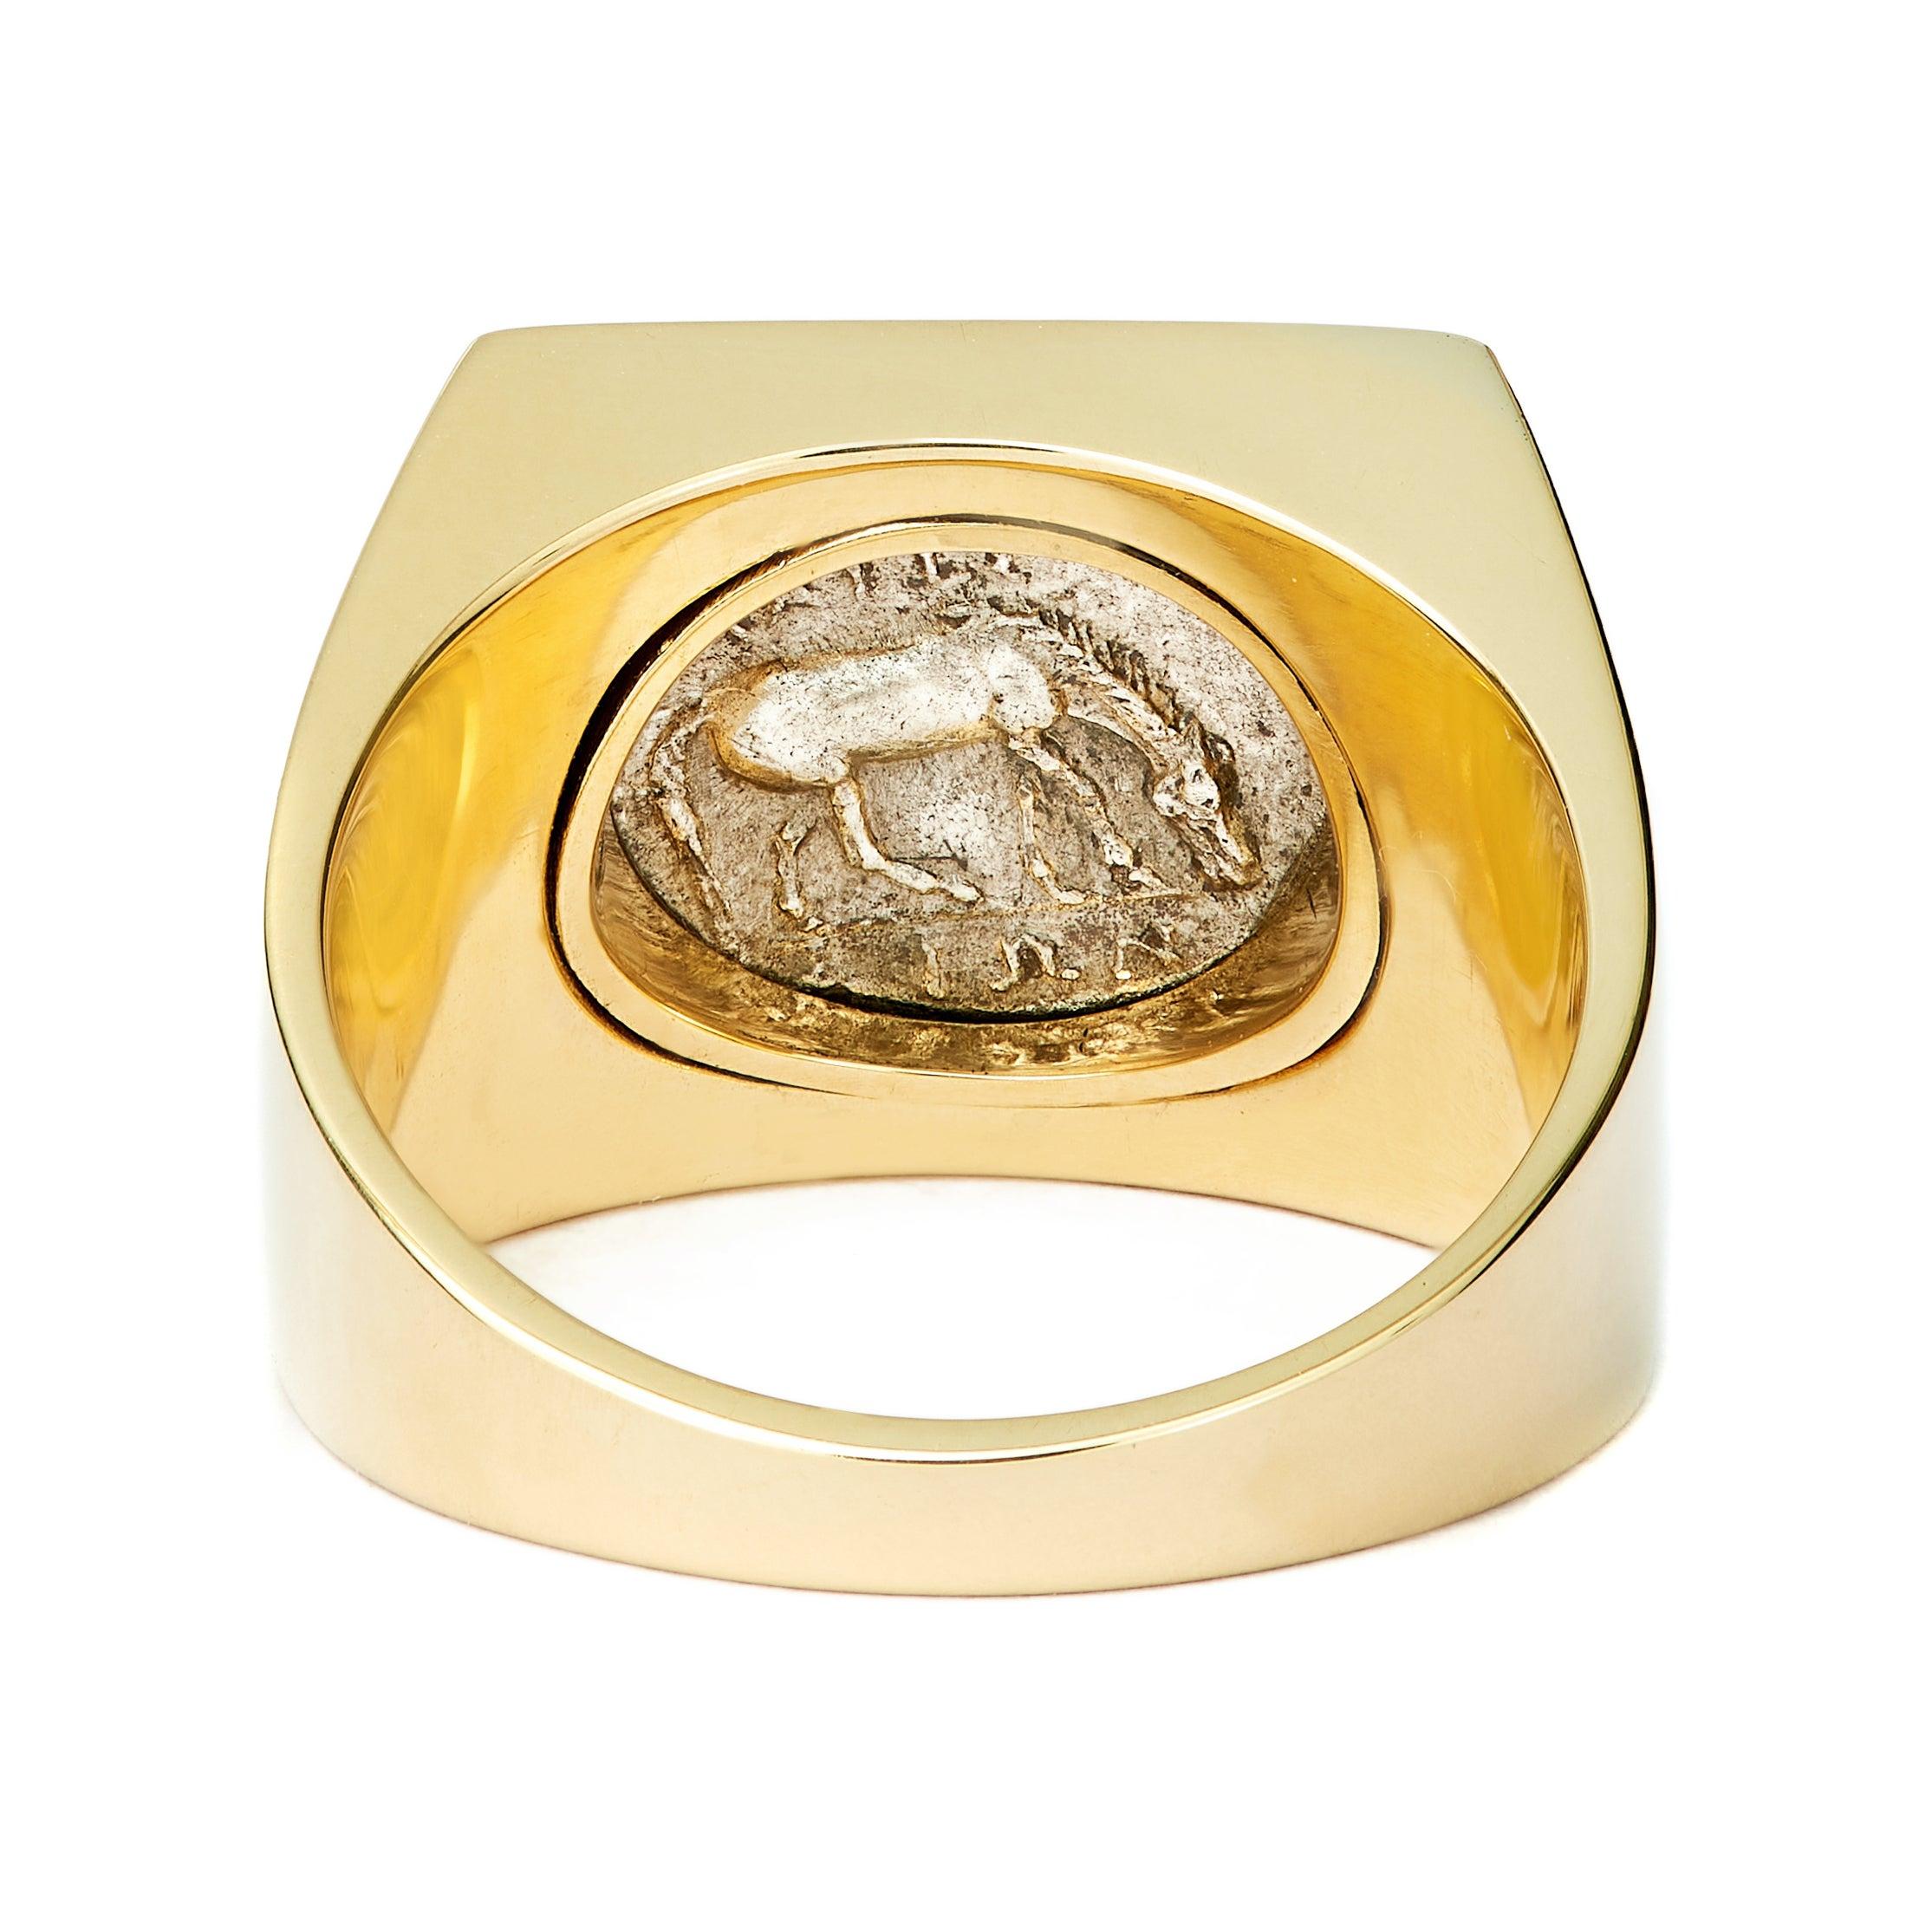 For Sale:  Dubini Nymph Larissa Ancient Silver Coin 18 Karat Yellow Gold Signet Ring 3